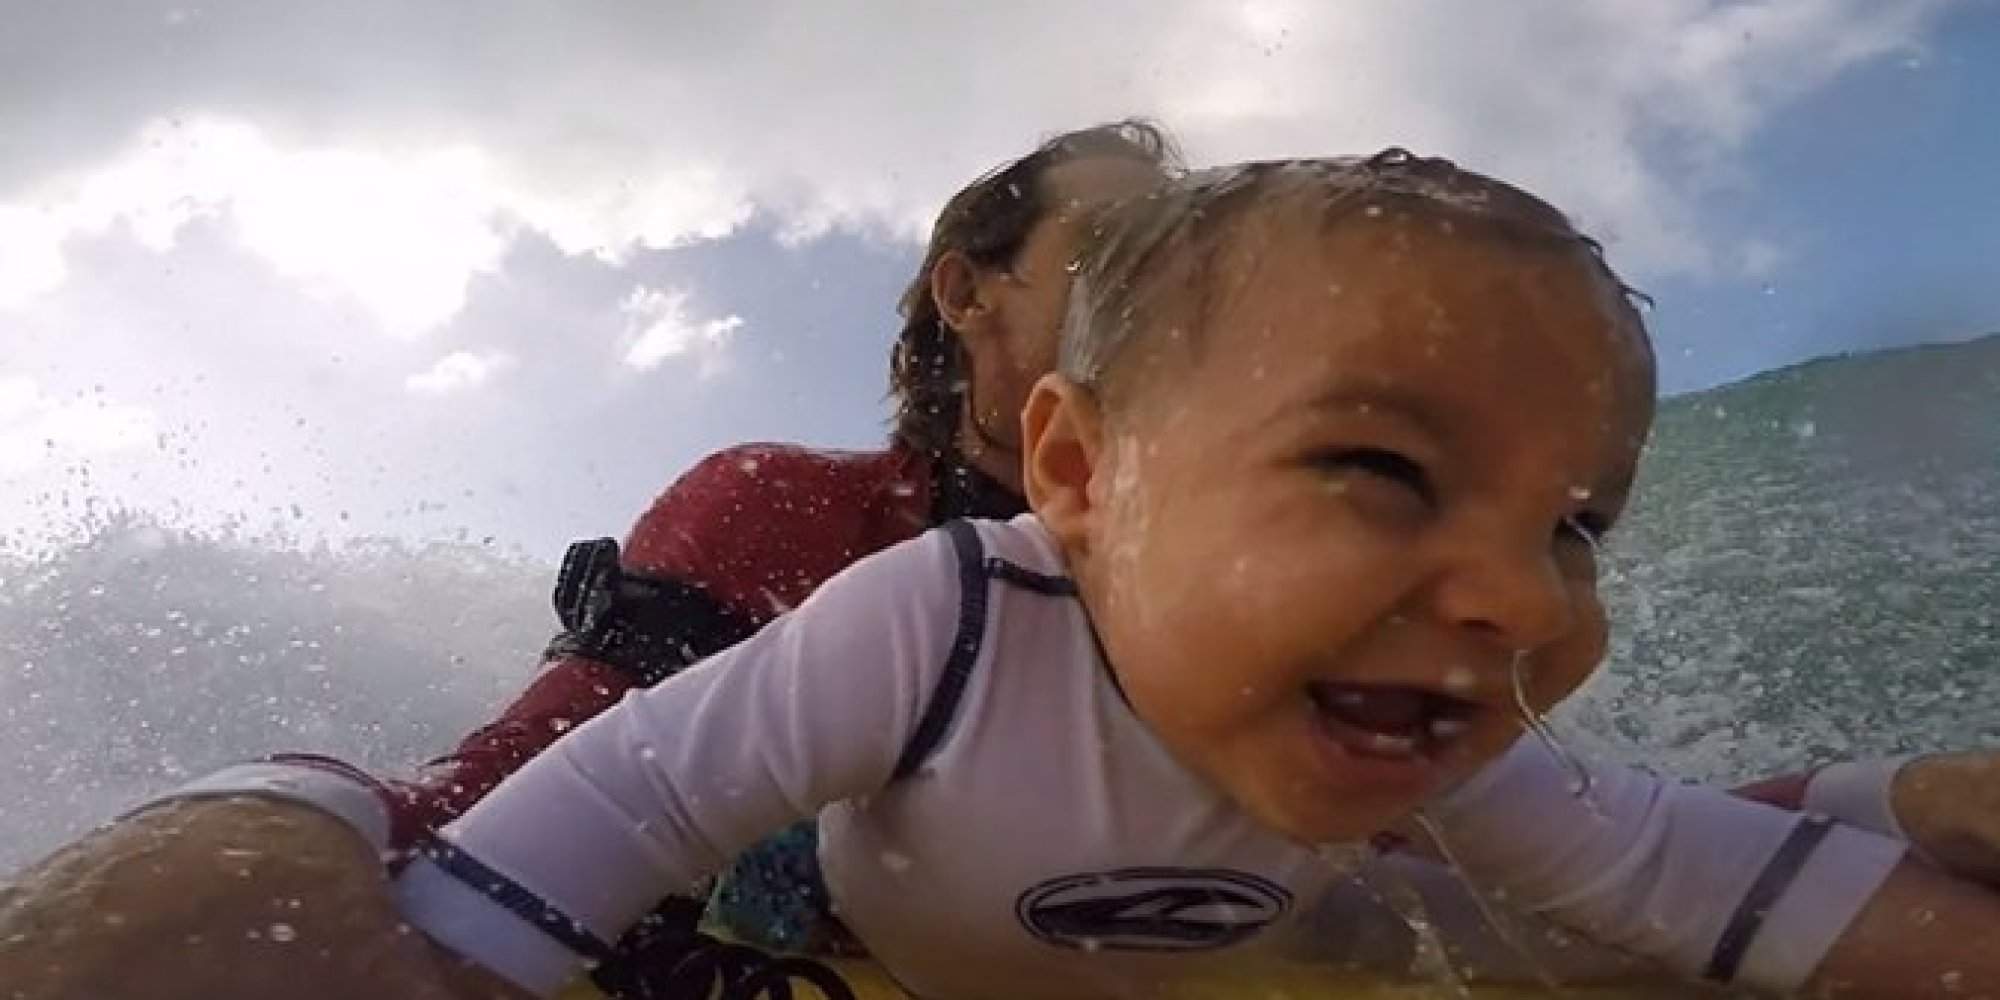 Baby Surfing First Wave Is The Epitome Of Pure Bliss 